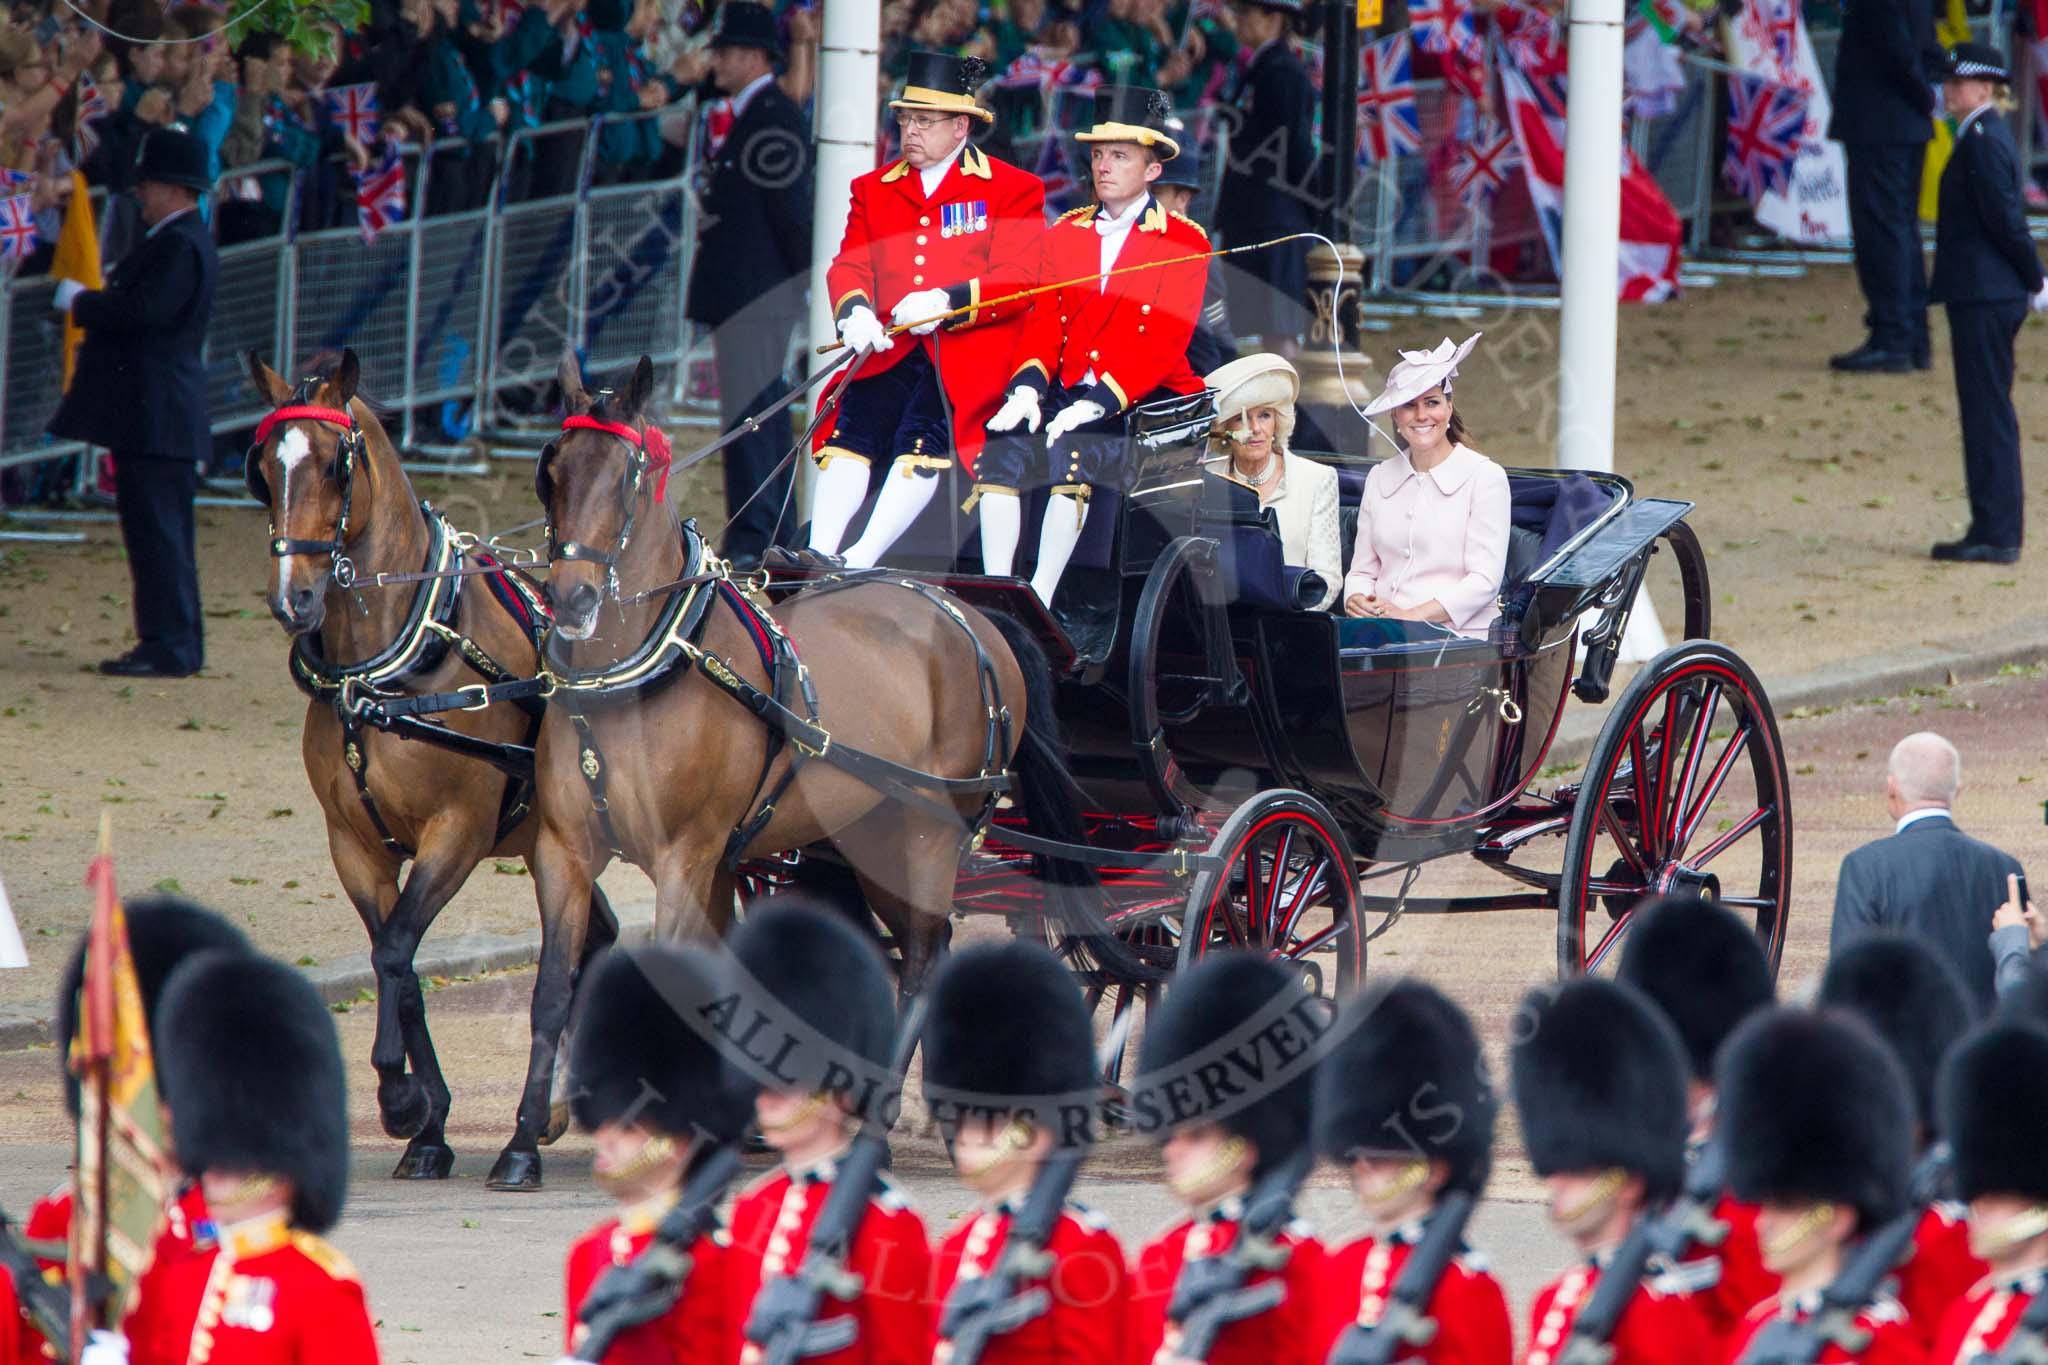 Trooping the Colour 2013: HRH The Duchess of Cornwall  and HRH The Duchess of Cambridge in the first barouche carriage on the way across Horse Guards Parade to watch the parade from the Major General's office. Image #182, 15 June 2013 10:49 Horse Guards Parade, London, UK